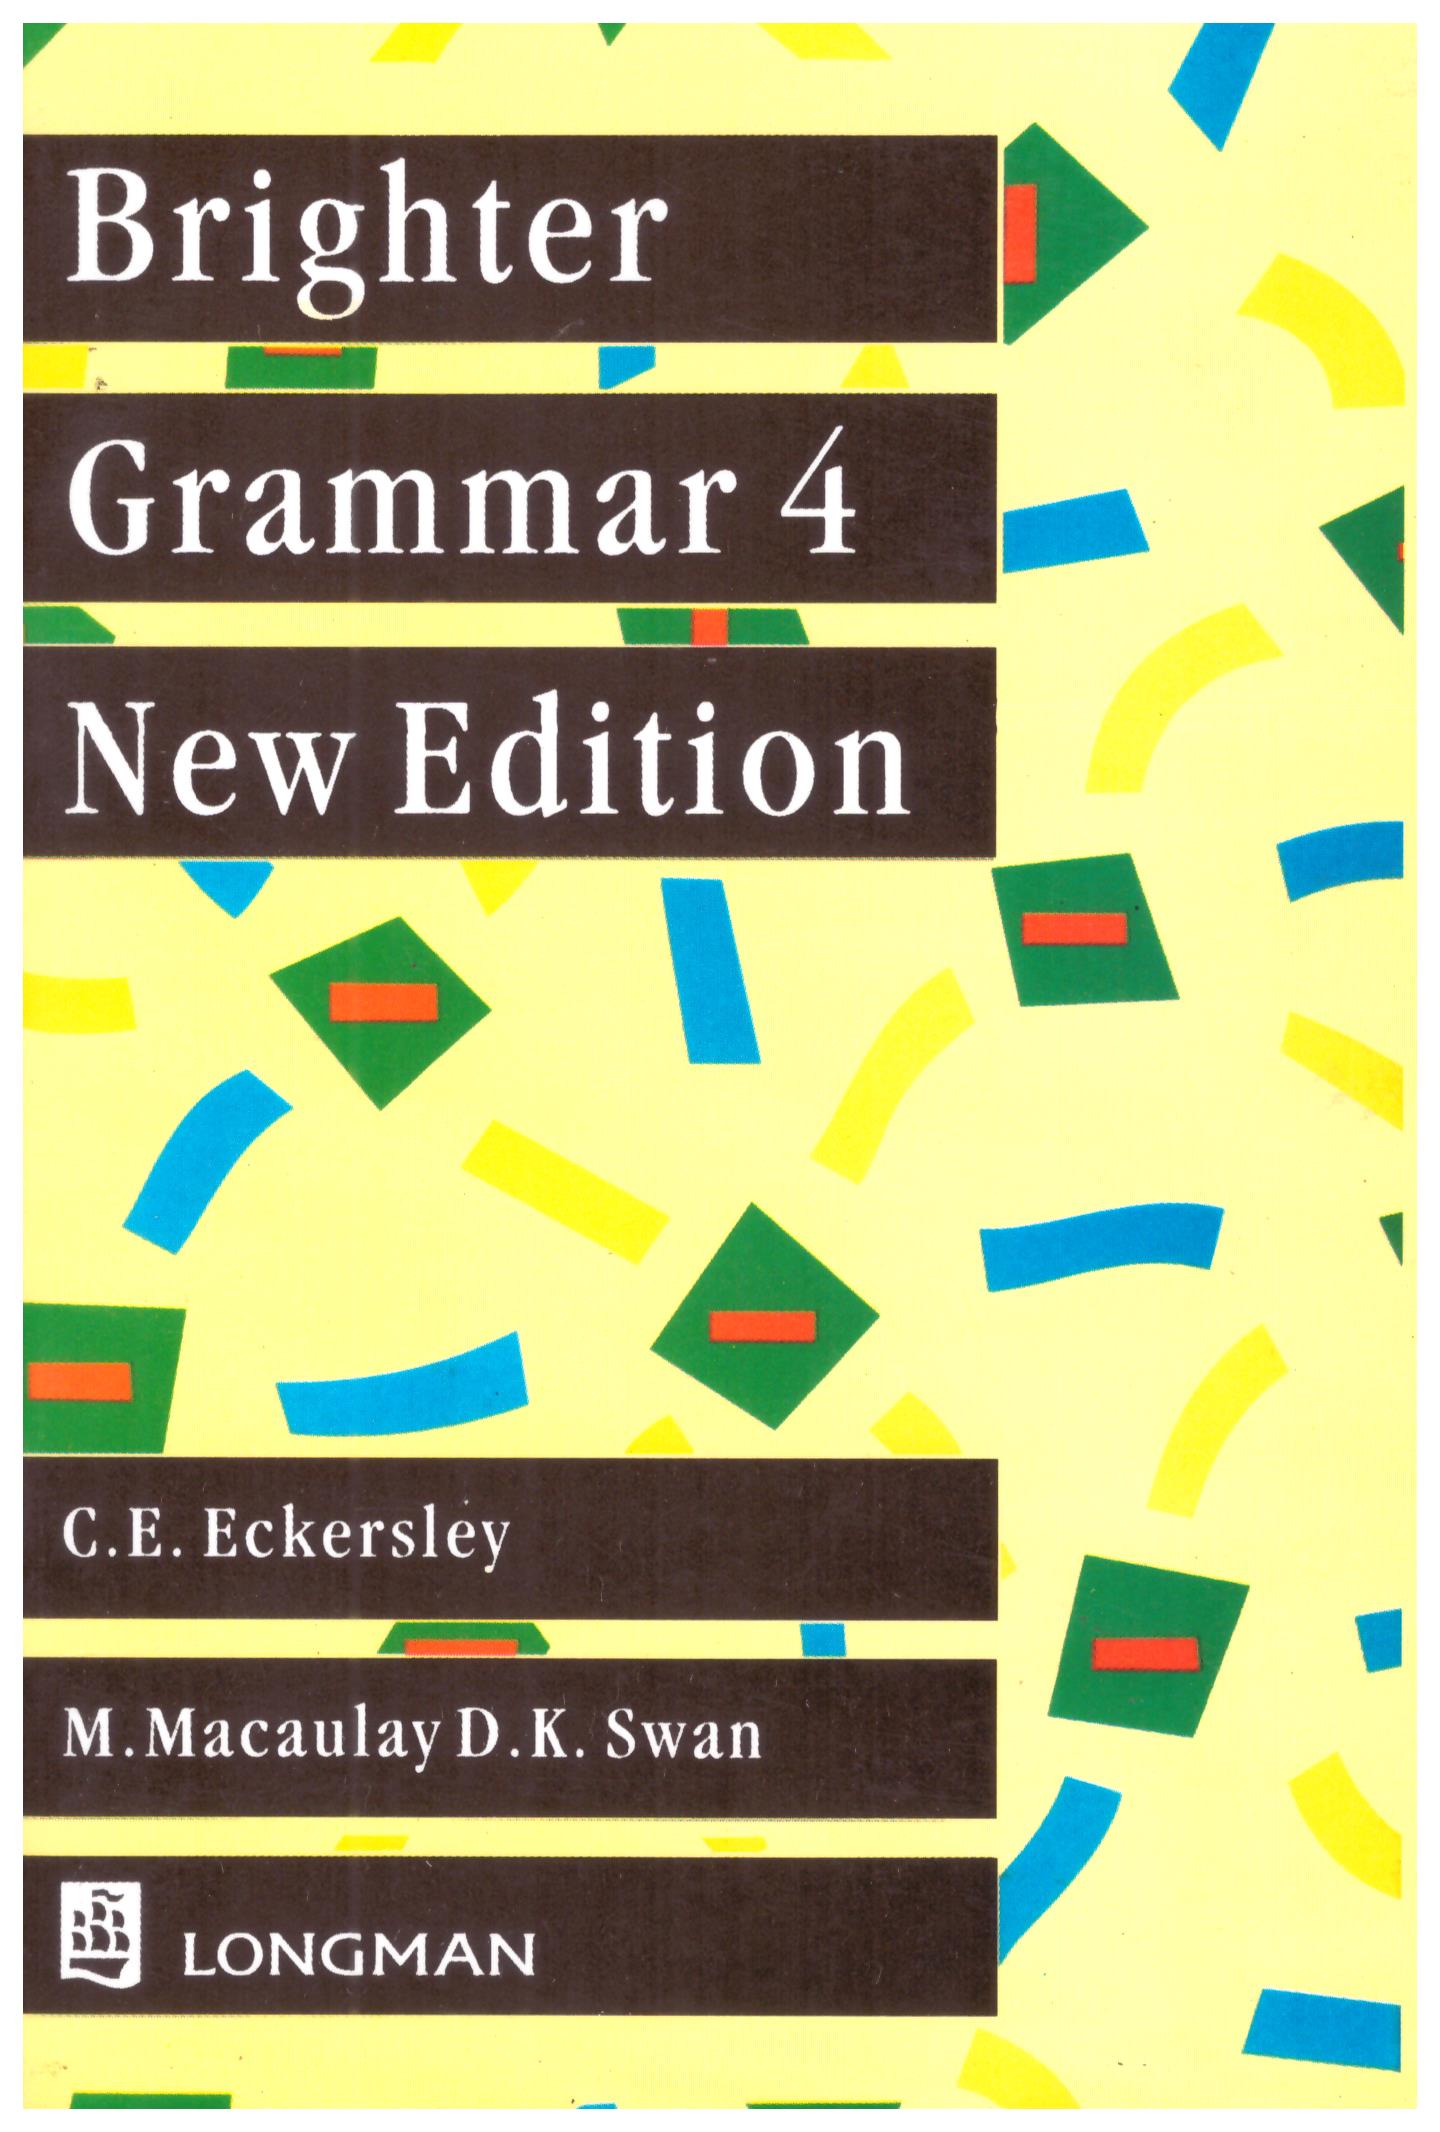 Brighter Grammar 4 An English Grammar With Exercises New Edition